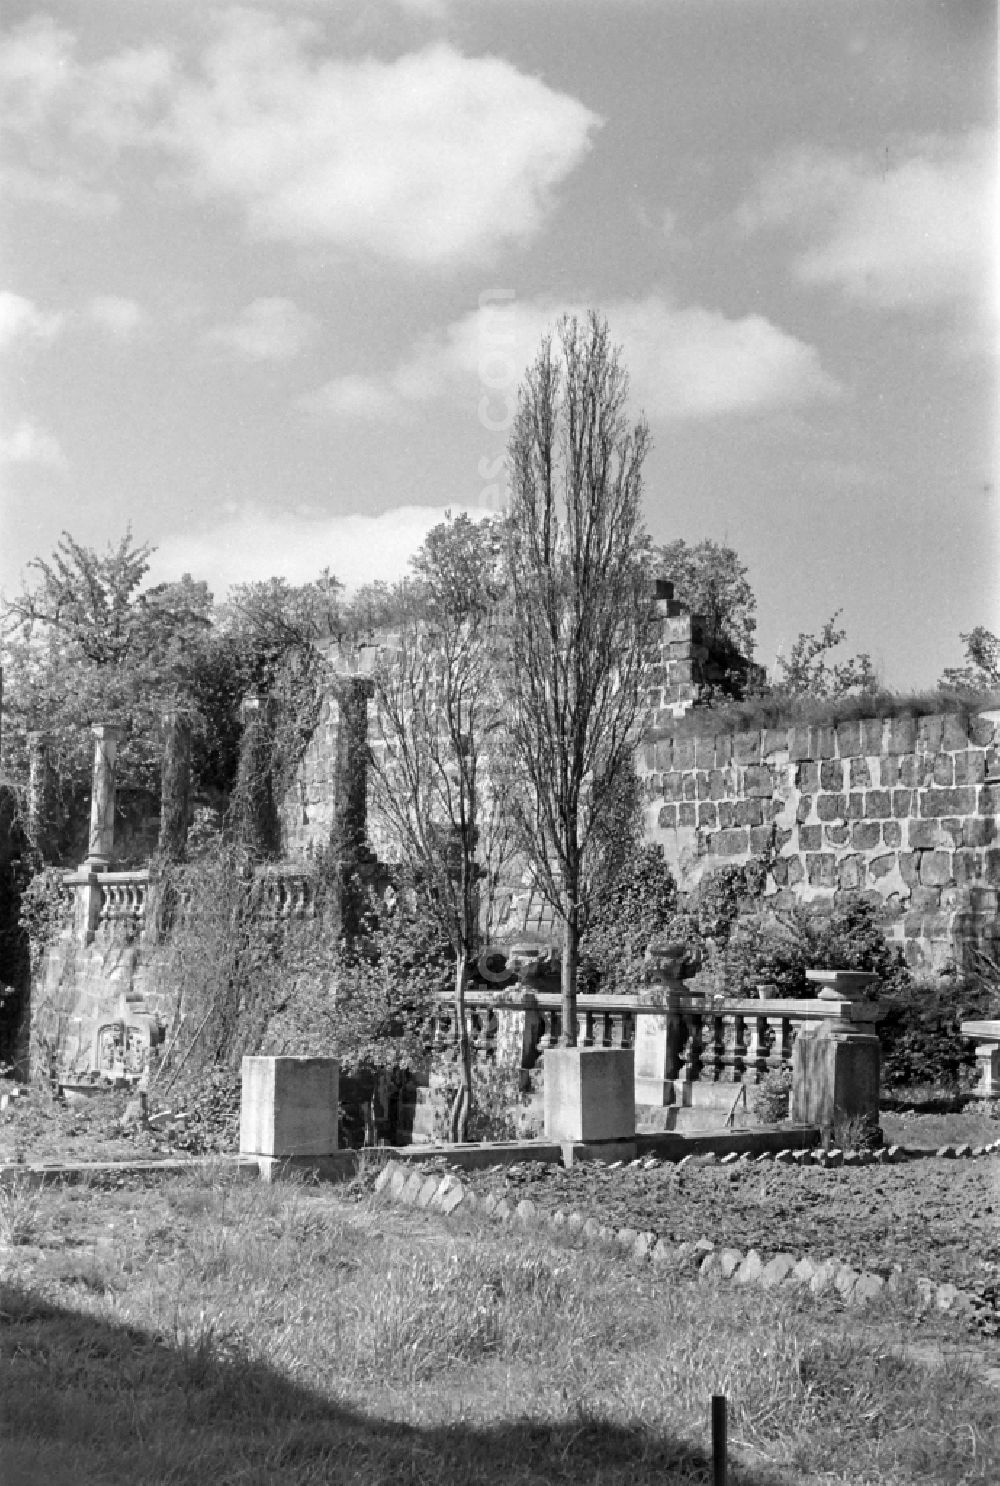 GDR photo archive: Halberstadt - Historic city wall at the old town in the city center an der Kuehlinger Strasse - Schwanebecker Strasse in Halberstadt in Saxony-Anhalt on the territory of the former GDR, German Democratic Republic